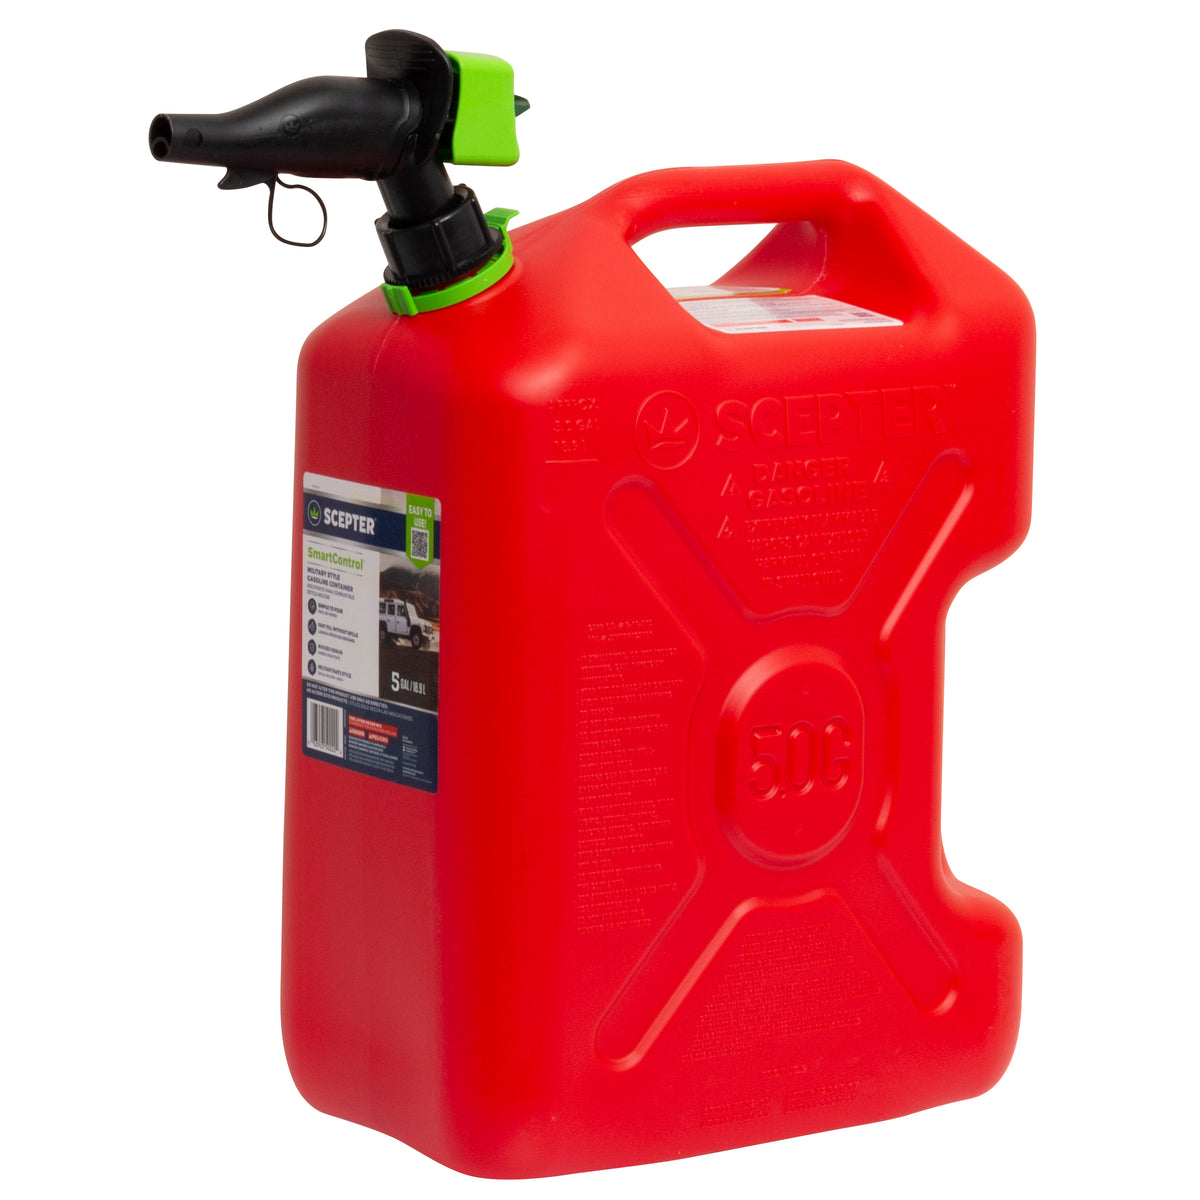 Scepter FSCRVG5 SmartControl RV Gas Can with Rear Handle - 5 Gallon